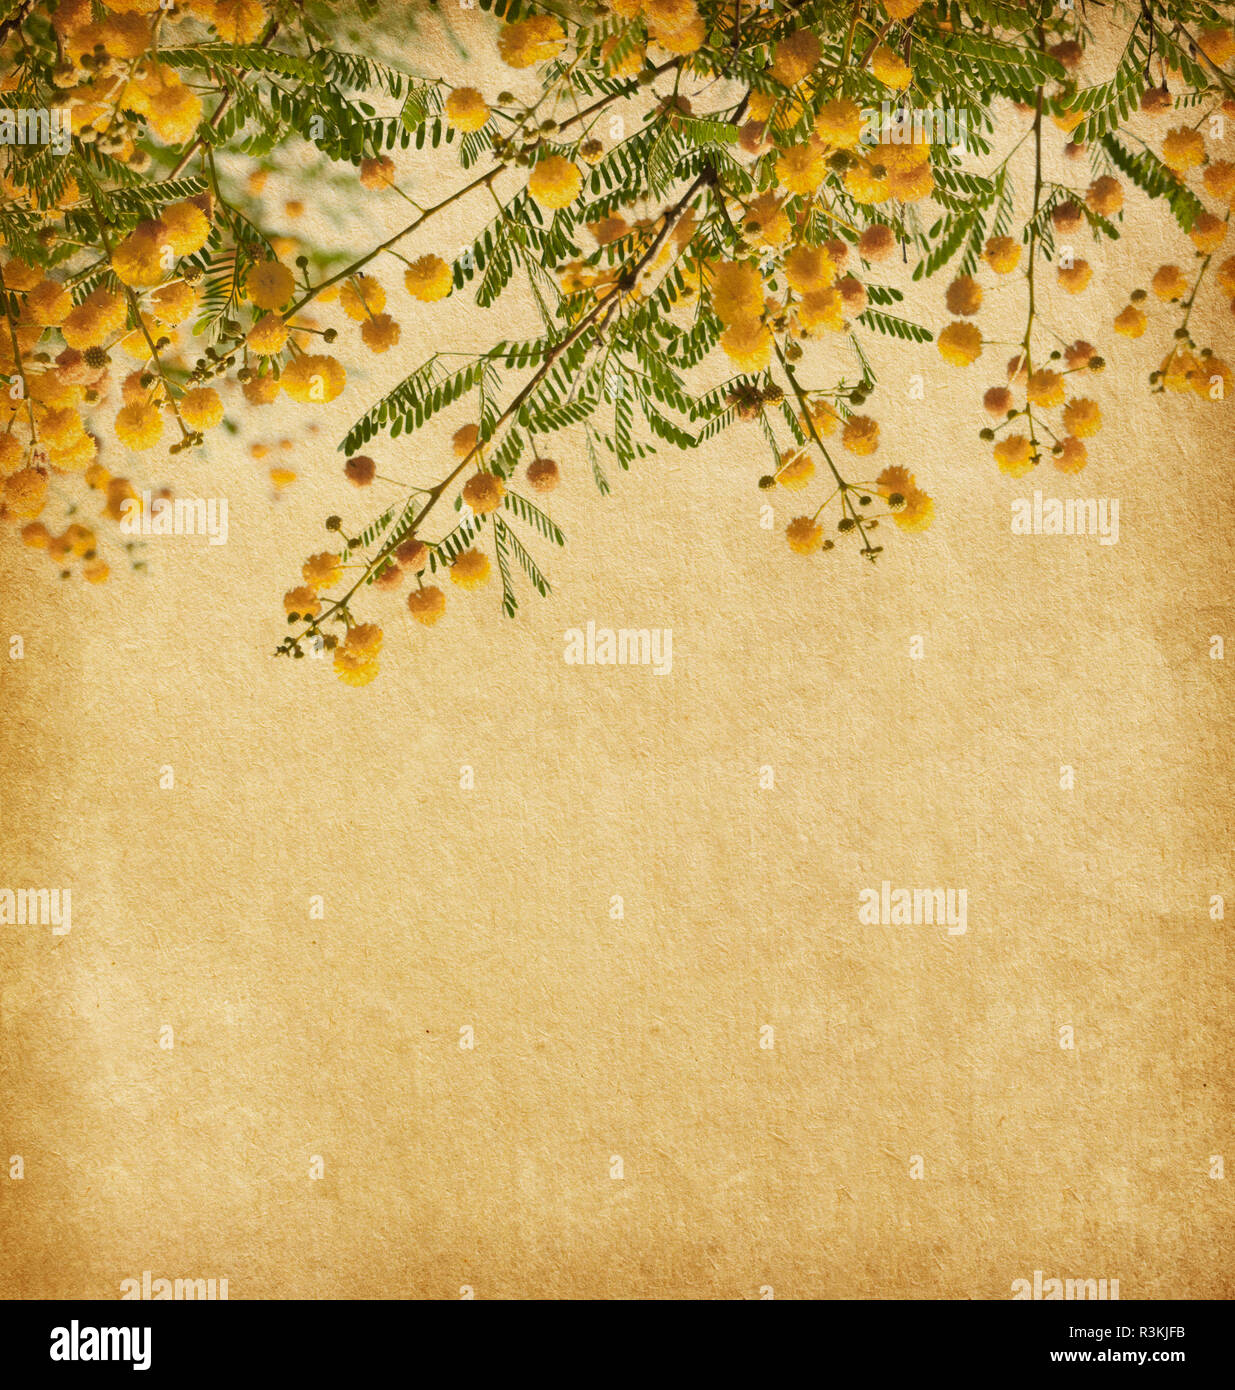 Old paper with yellow flowers of acacia.   Acacia macracantha Stock Photo